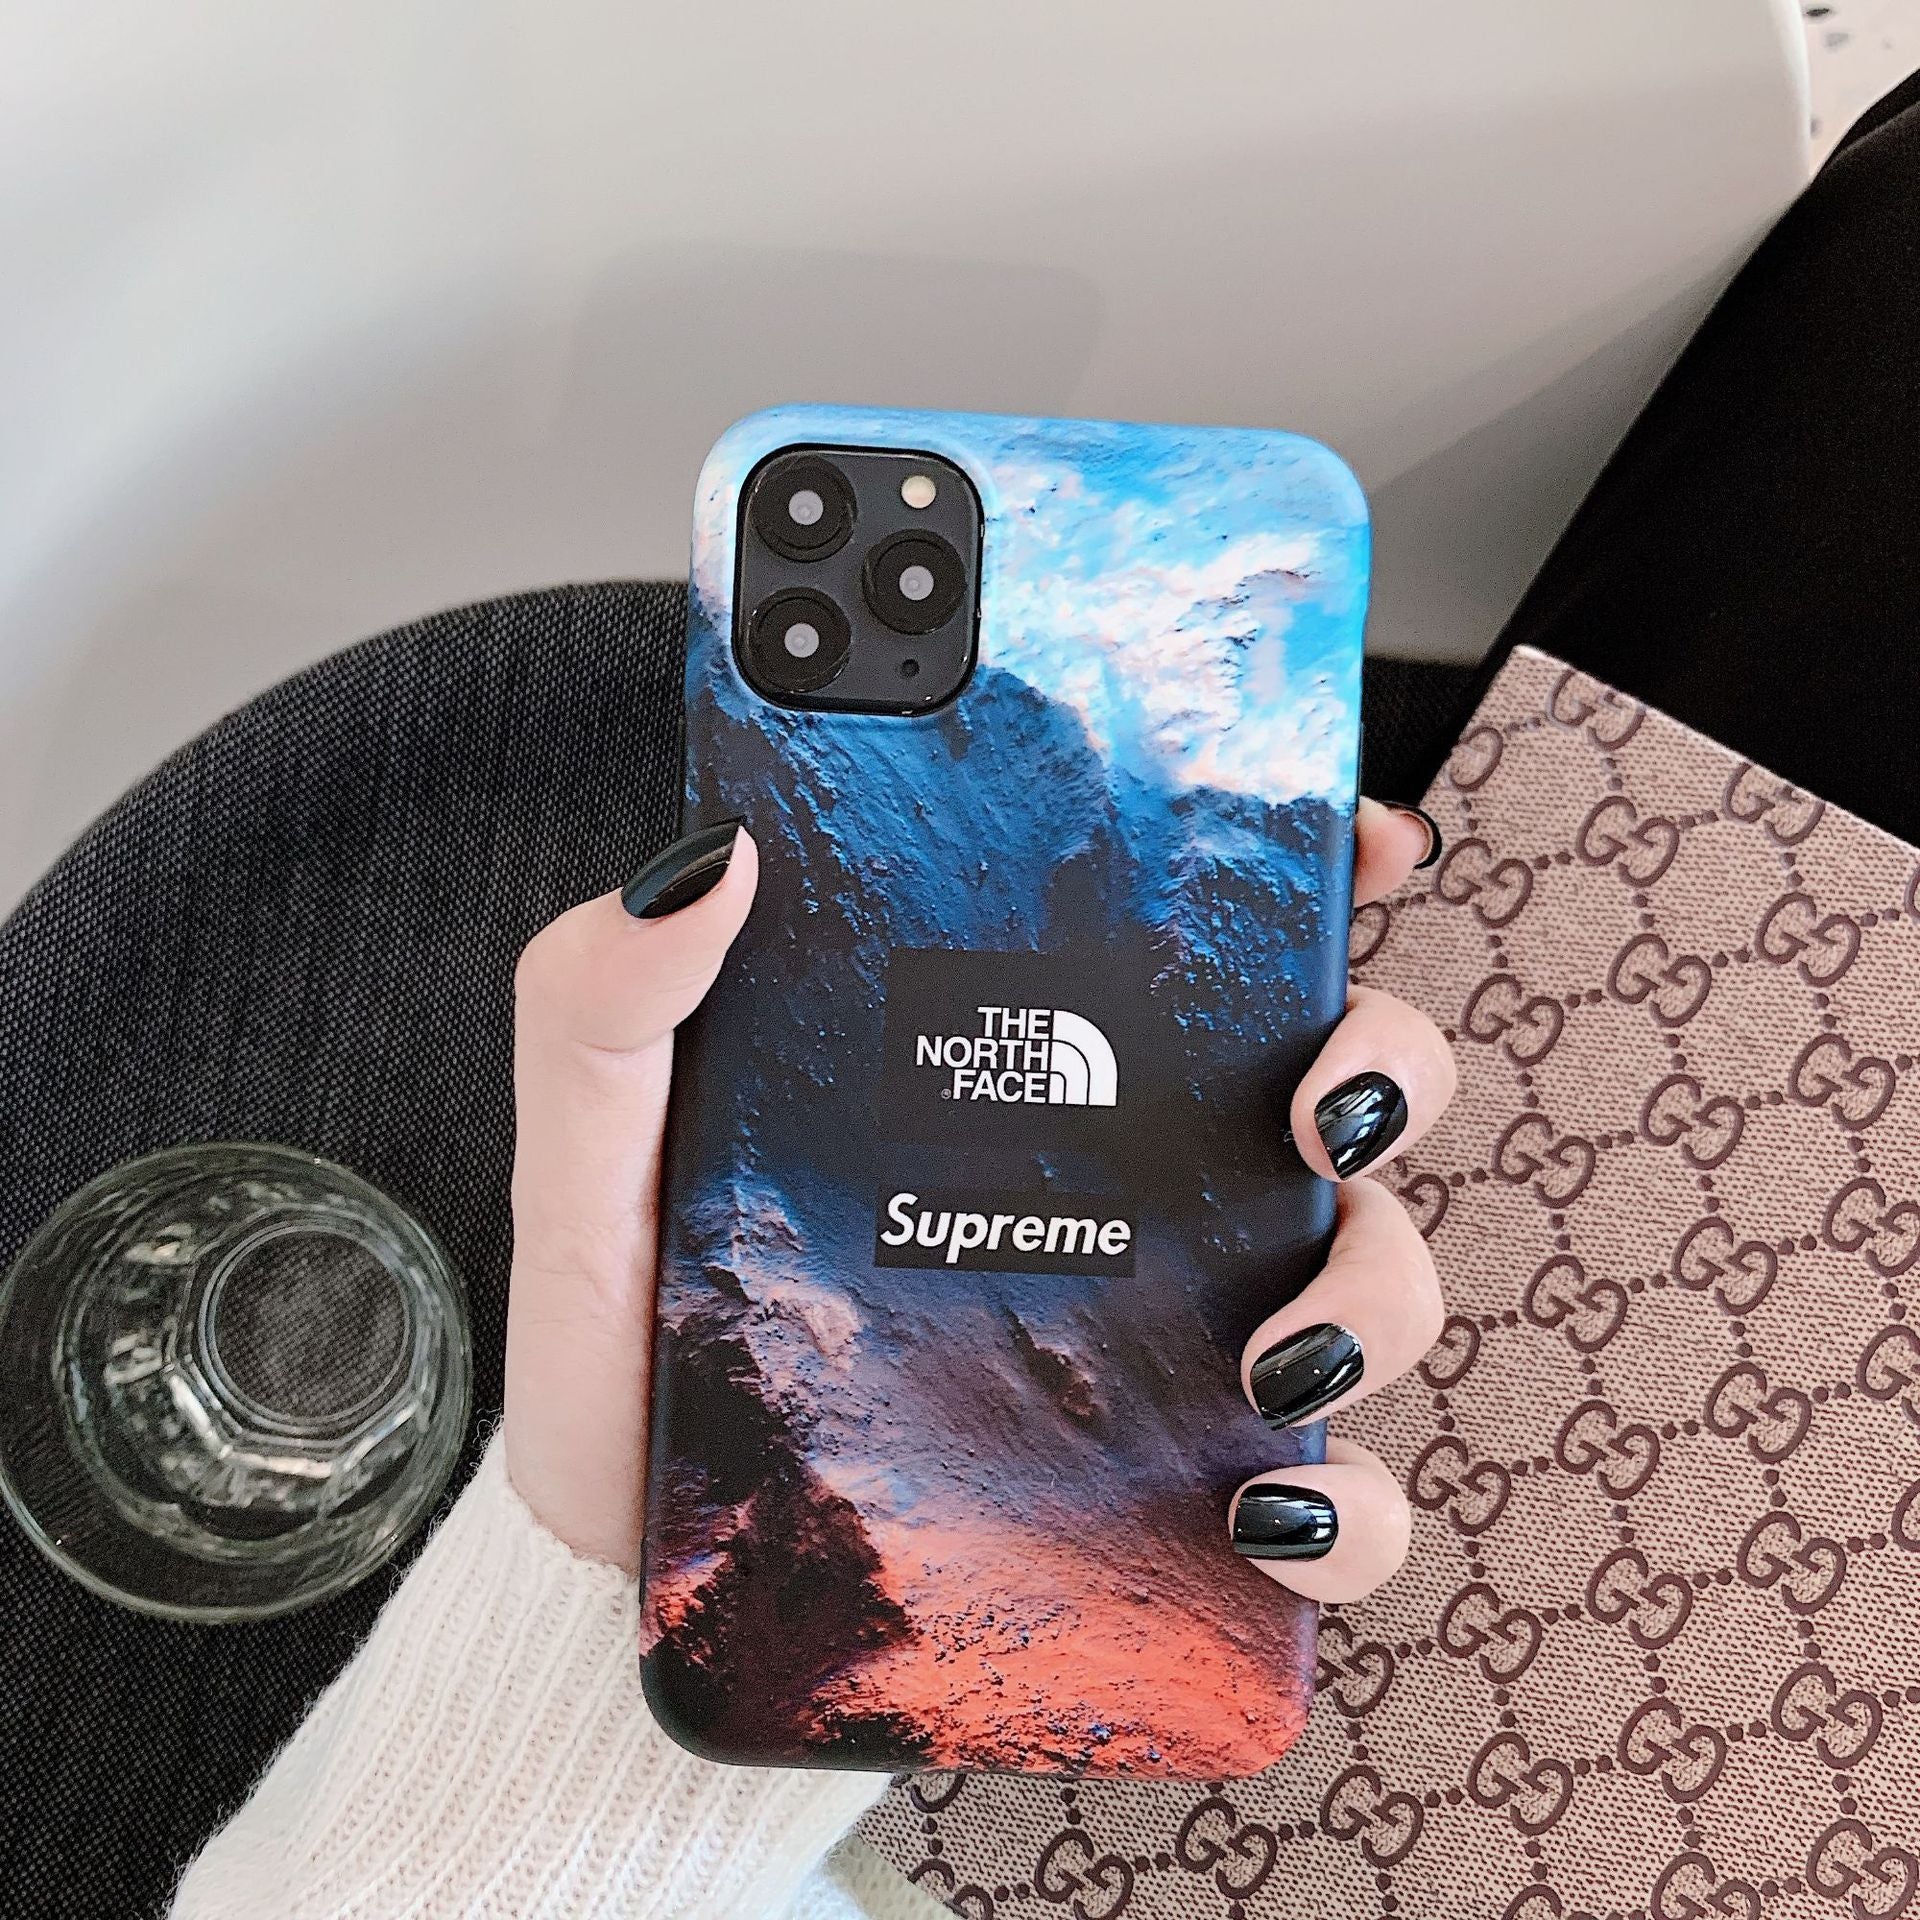 The North Face X Supreme Iphone 11 Pro Max Case Dopetify